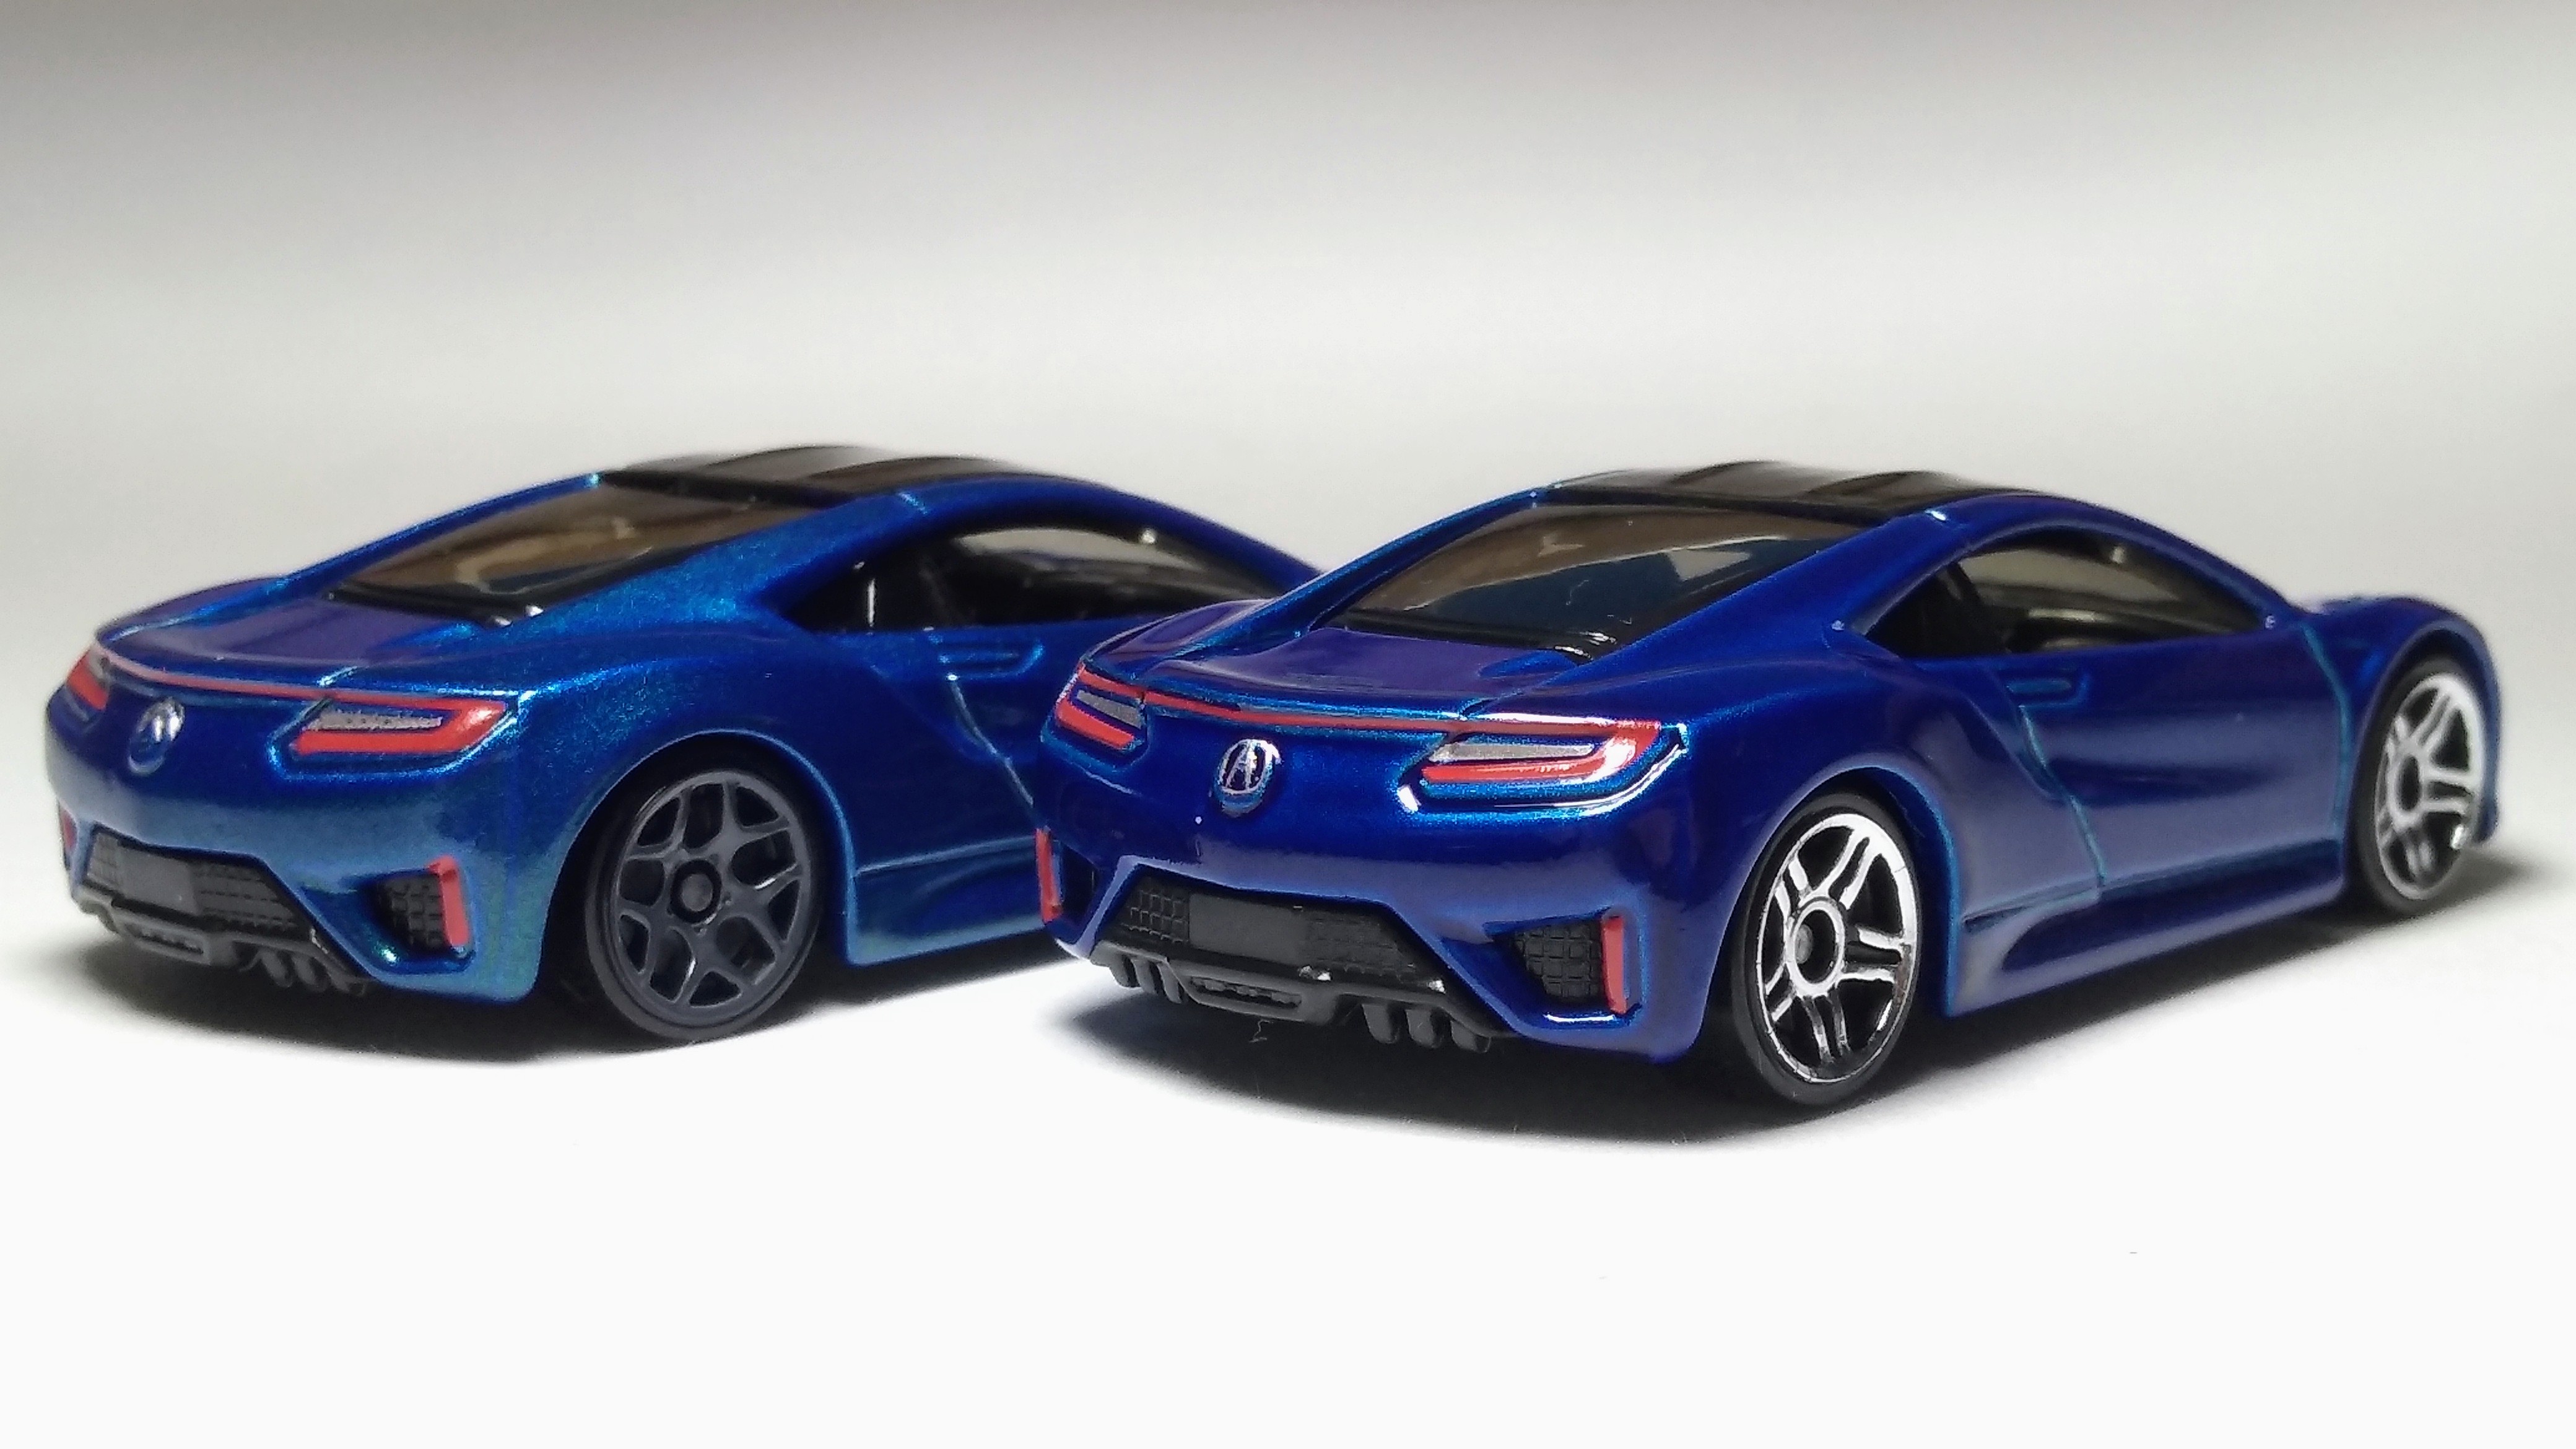 Details about   '17 ACURA NSX Hot Wheels 2019 HW Exotics 1:64 Scale Die-cast Car Blue NEW 